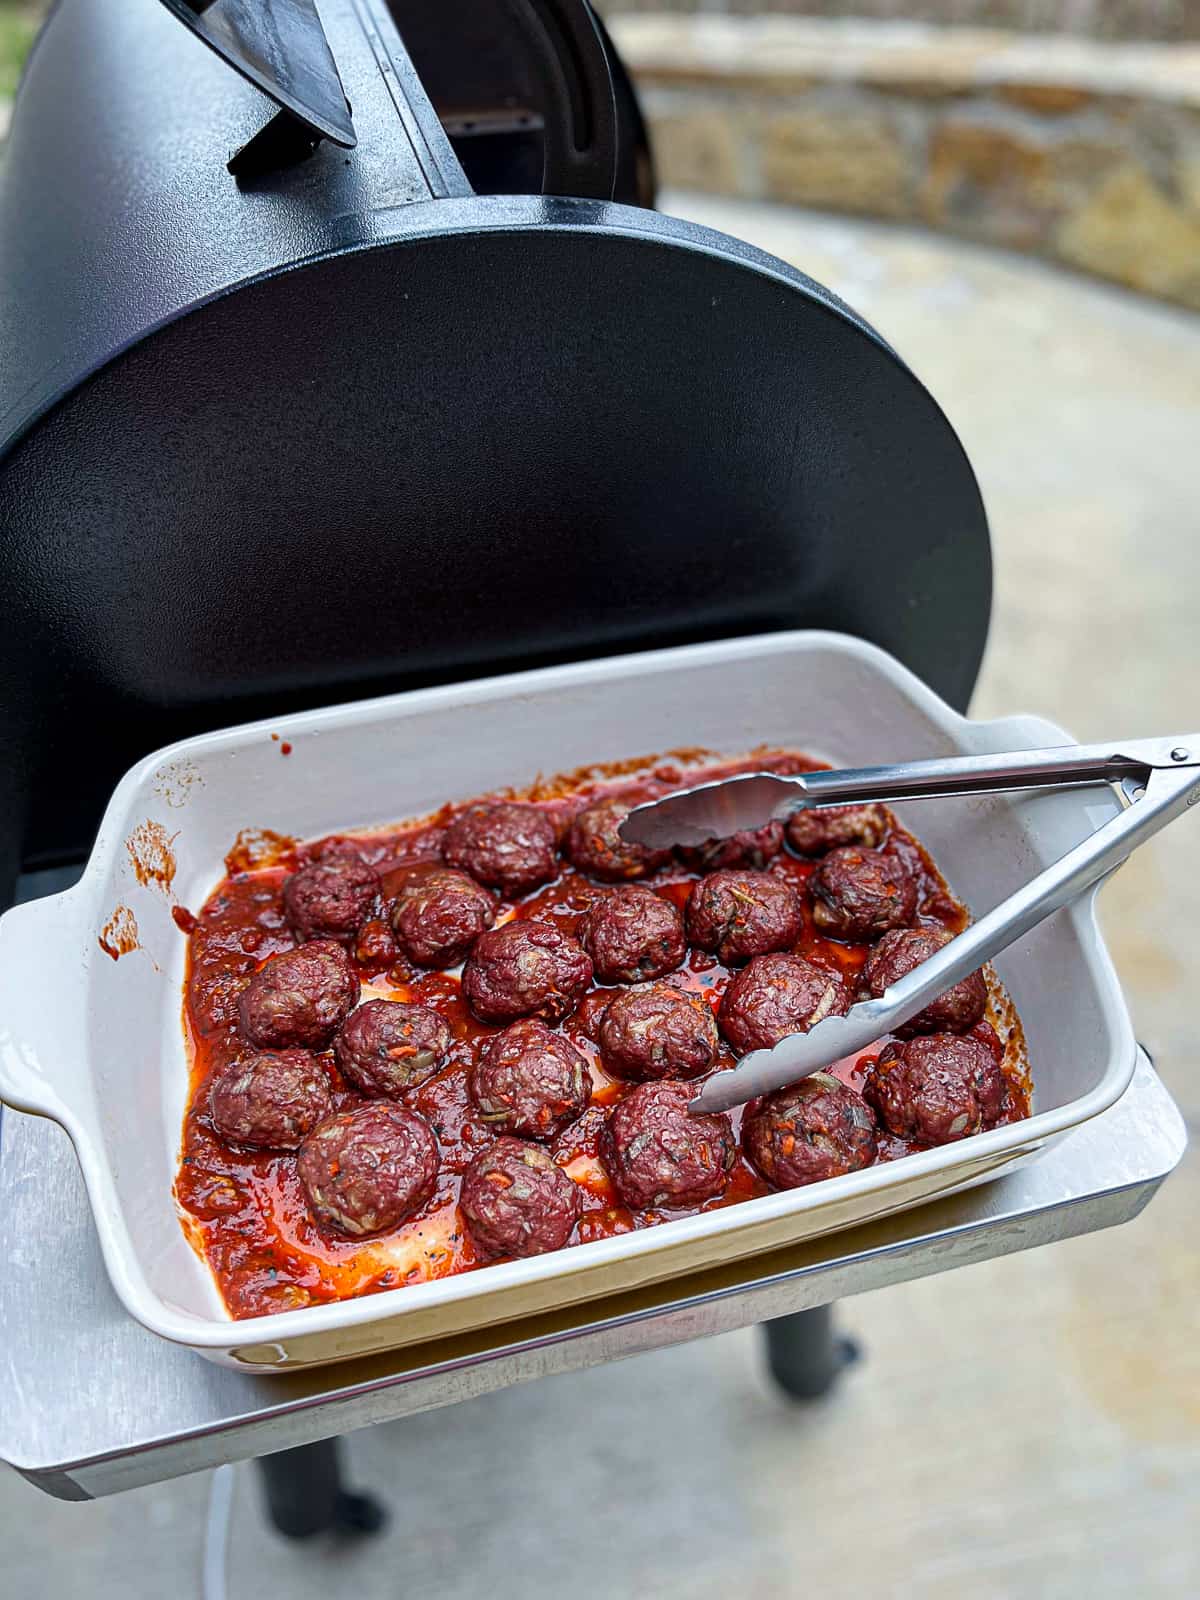 Traeger Smoked Meatballs With Sauce